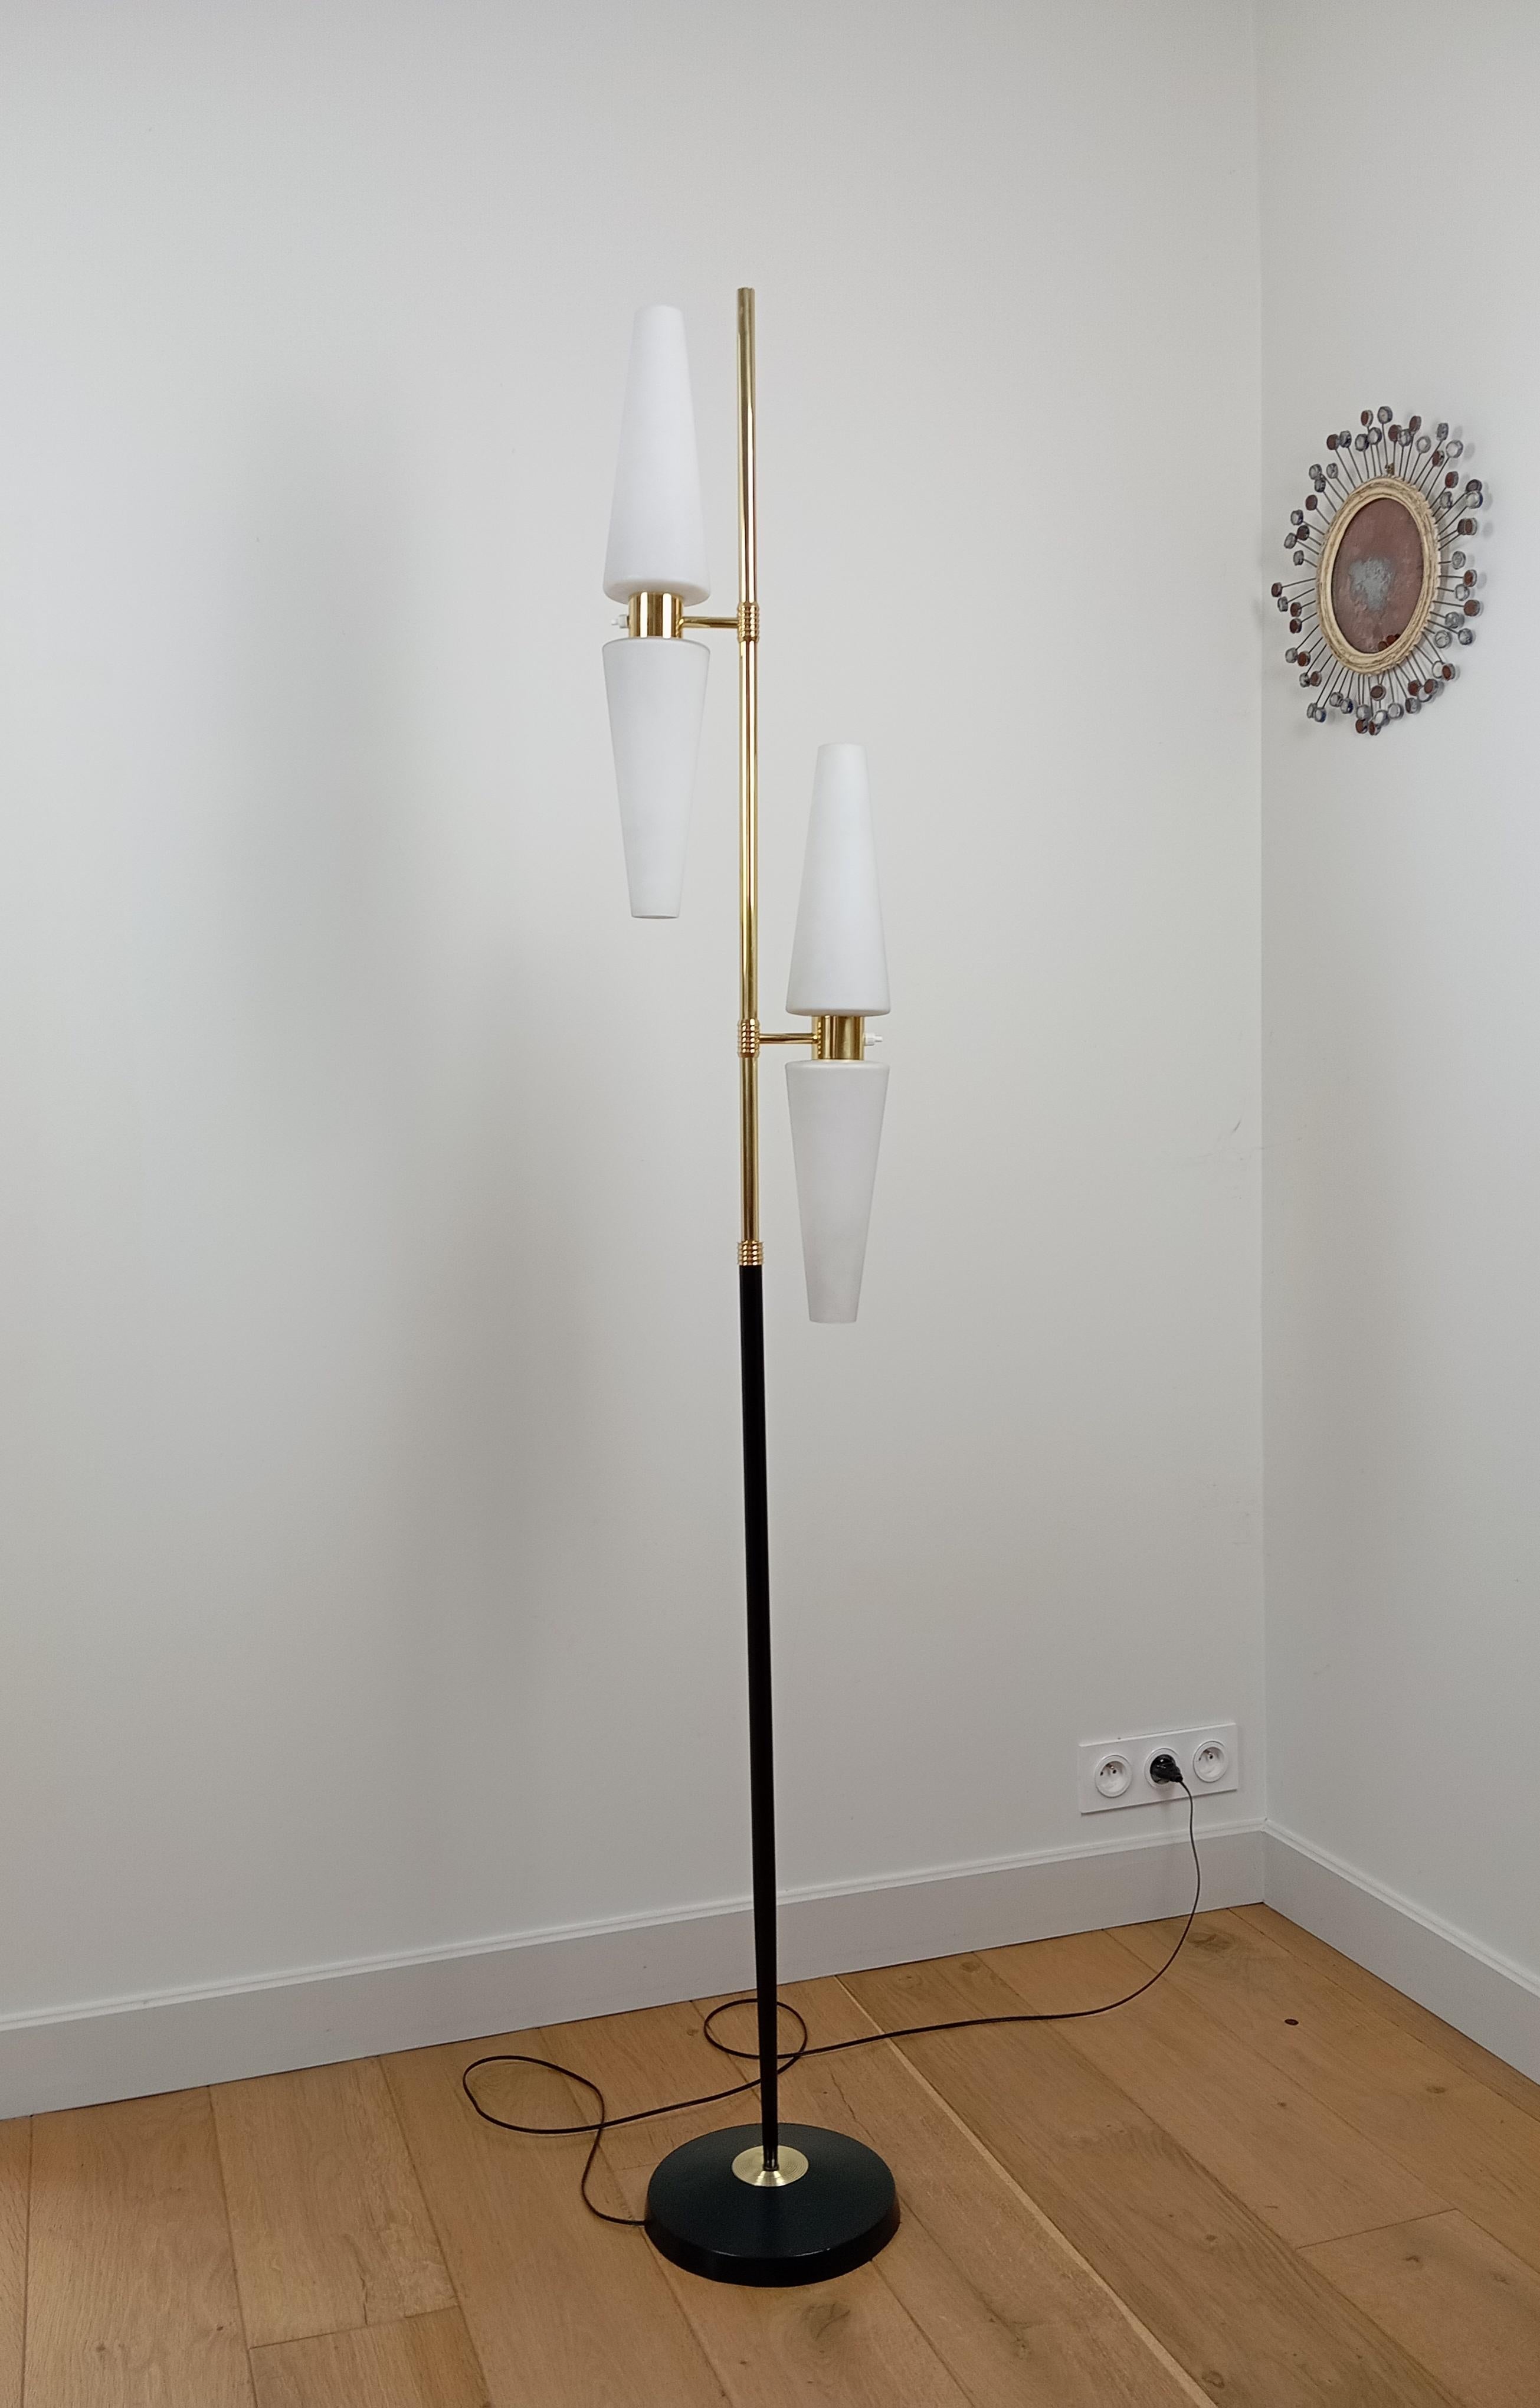 Floor lamp in black lacquered metal and brass.
Composed of a circular base on which is fixed a conical metal and brass arm.
4 conical shades in white opaline glass are fixed to brass supports on either side of the arm.
A button is fitted on each